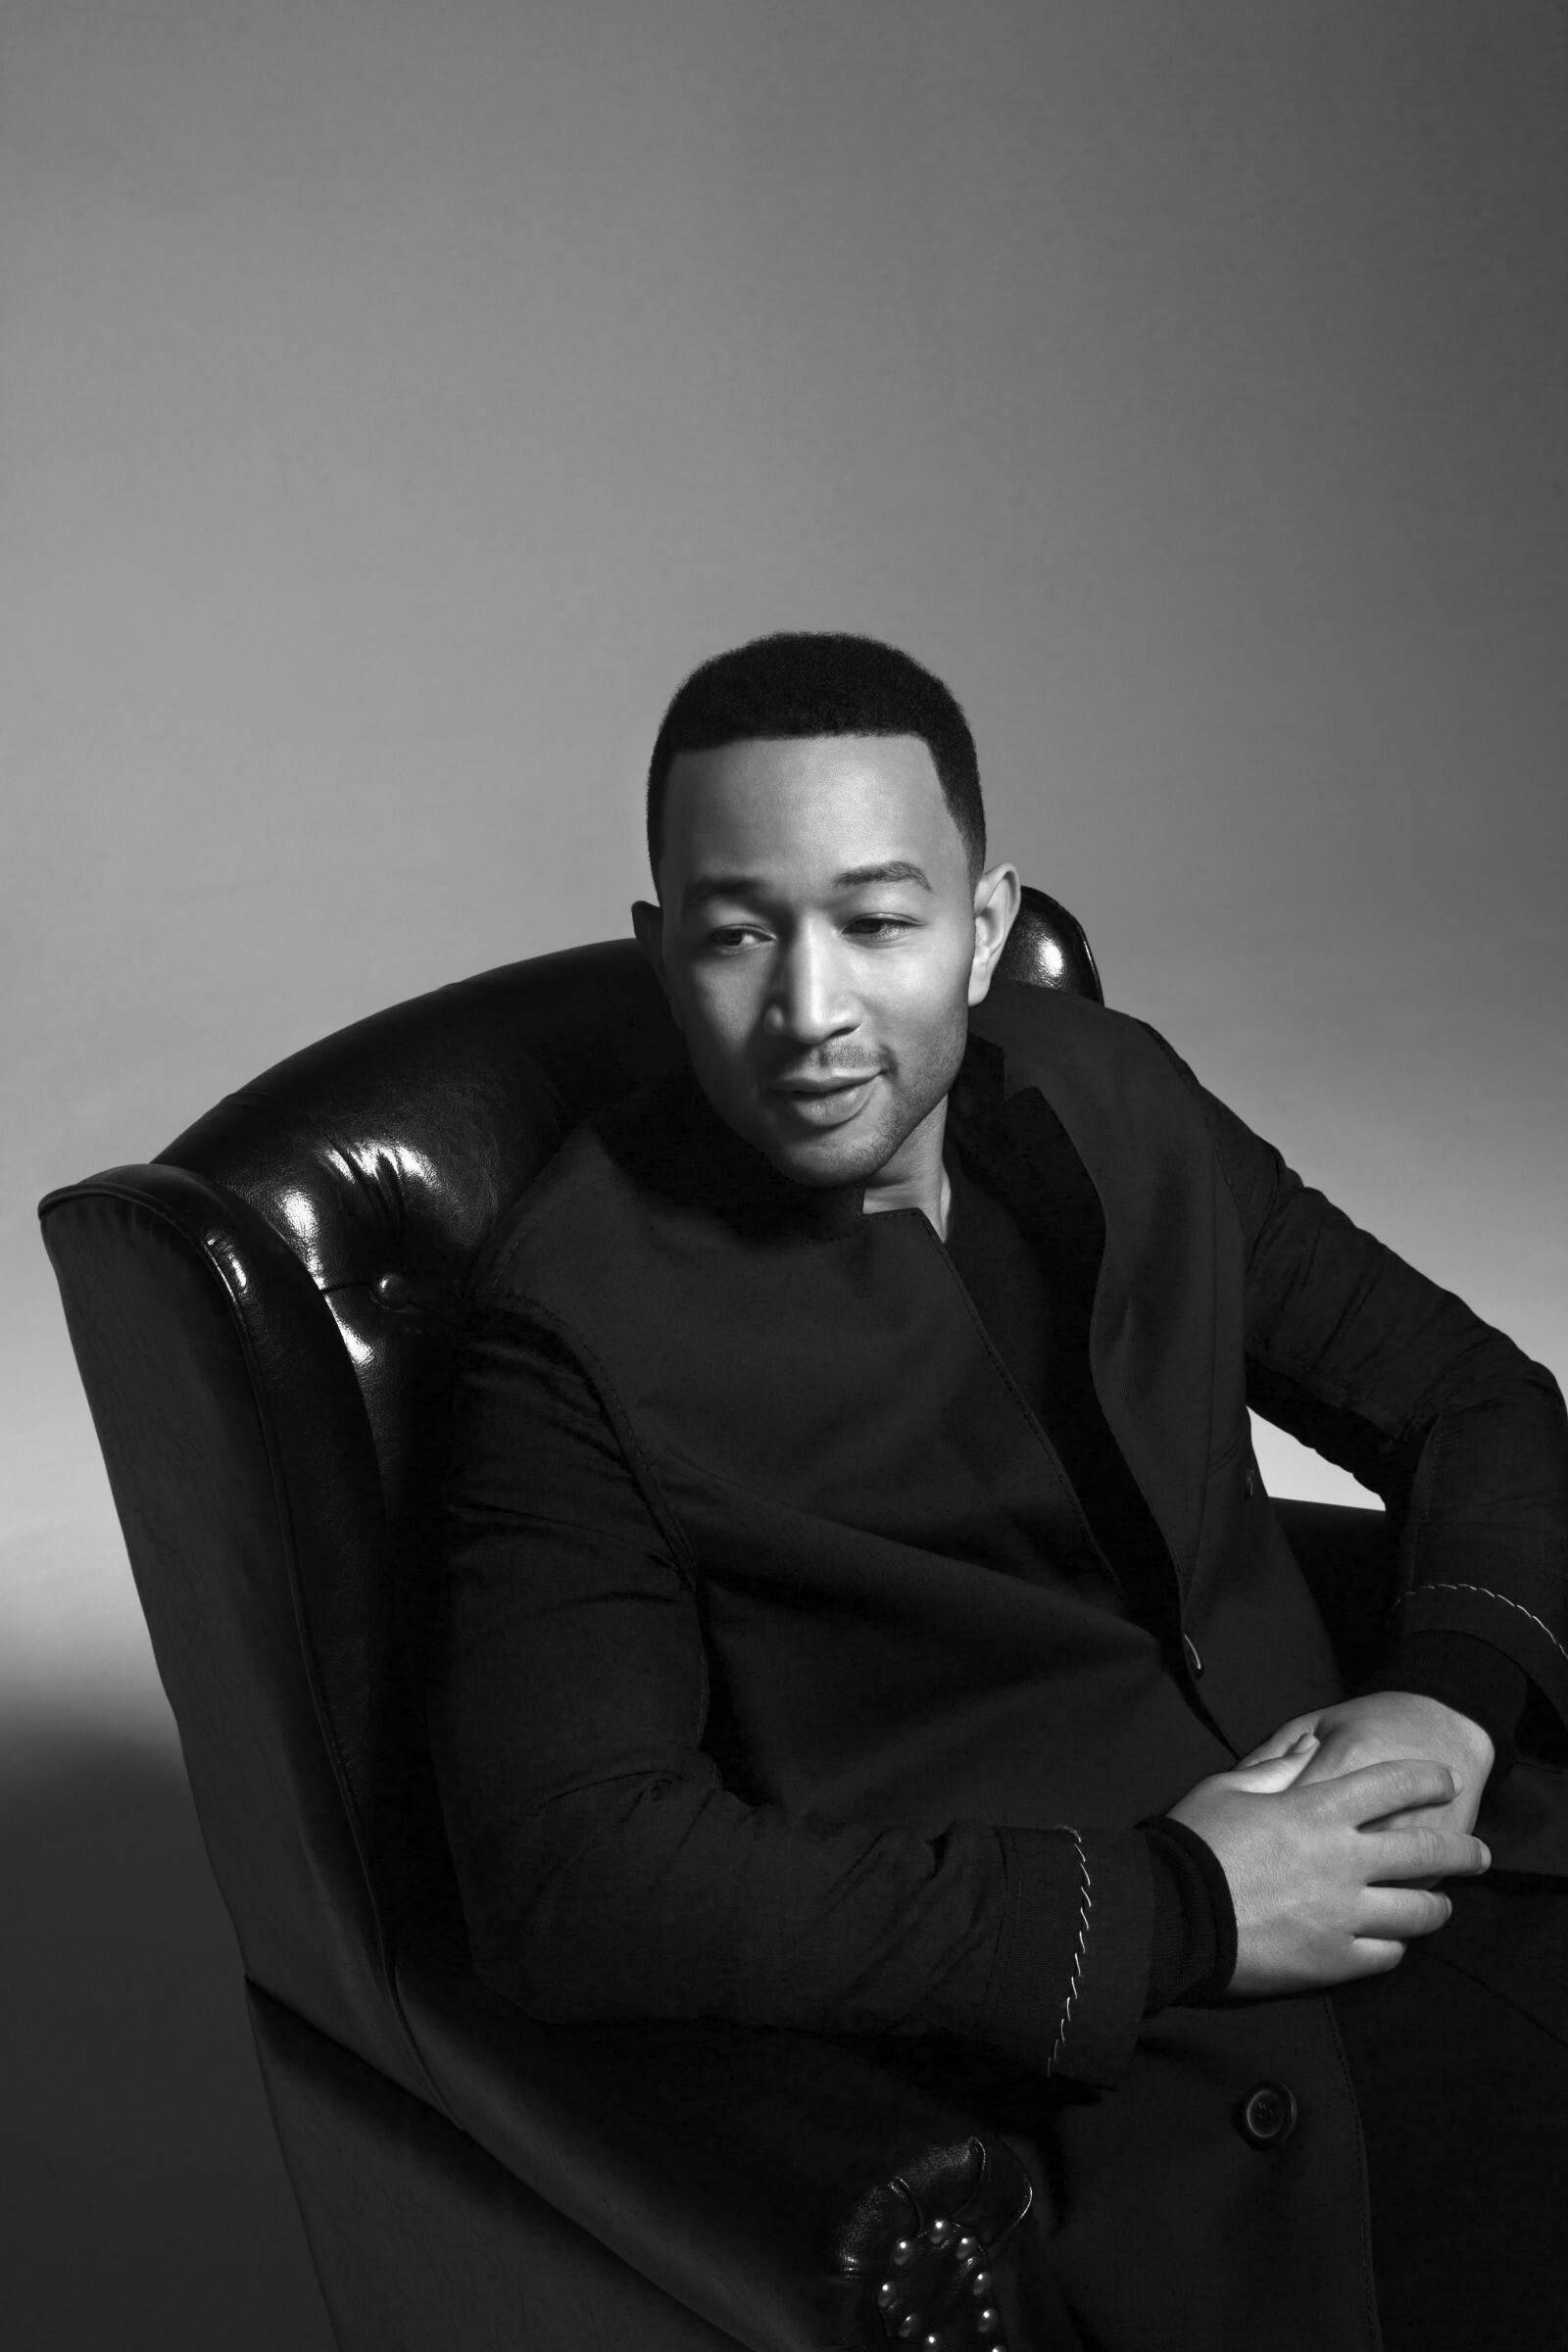 John Legend: Get Lifted won the award for Best R&B Album at the 48th Annual Grammy Awards. 1600x2400 HD Wallpaper.